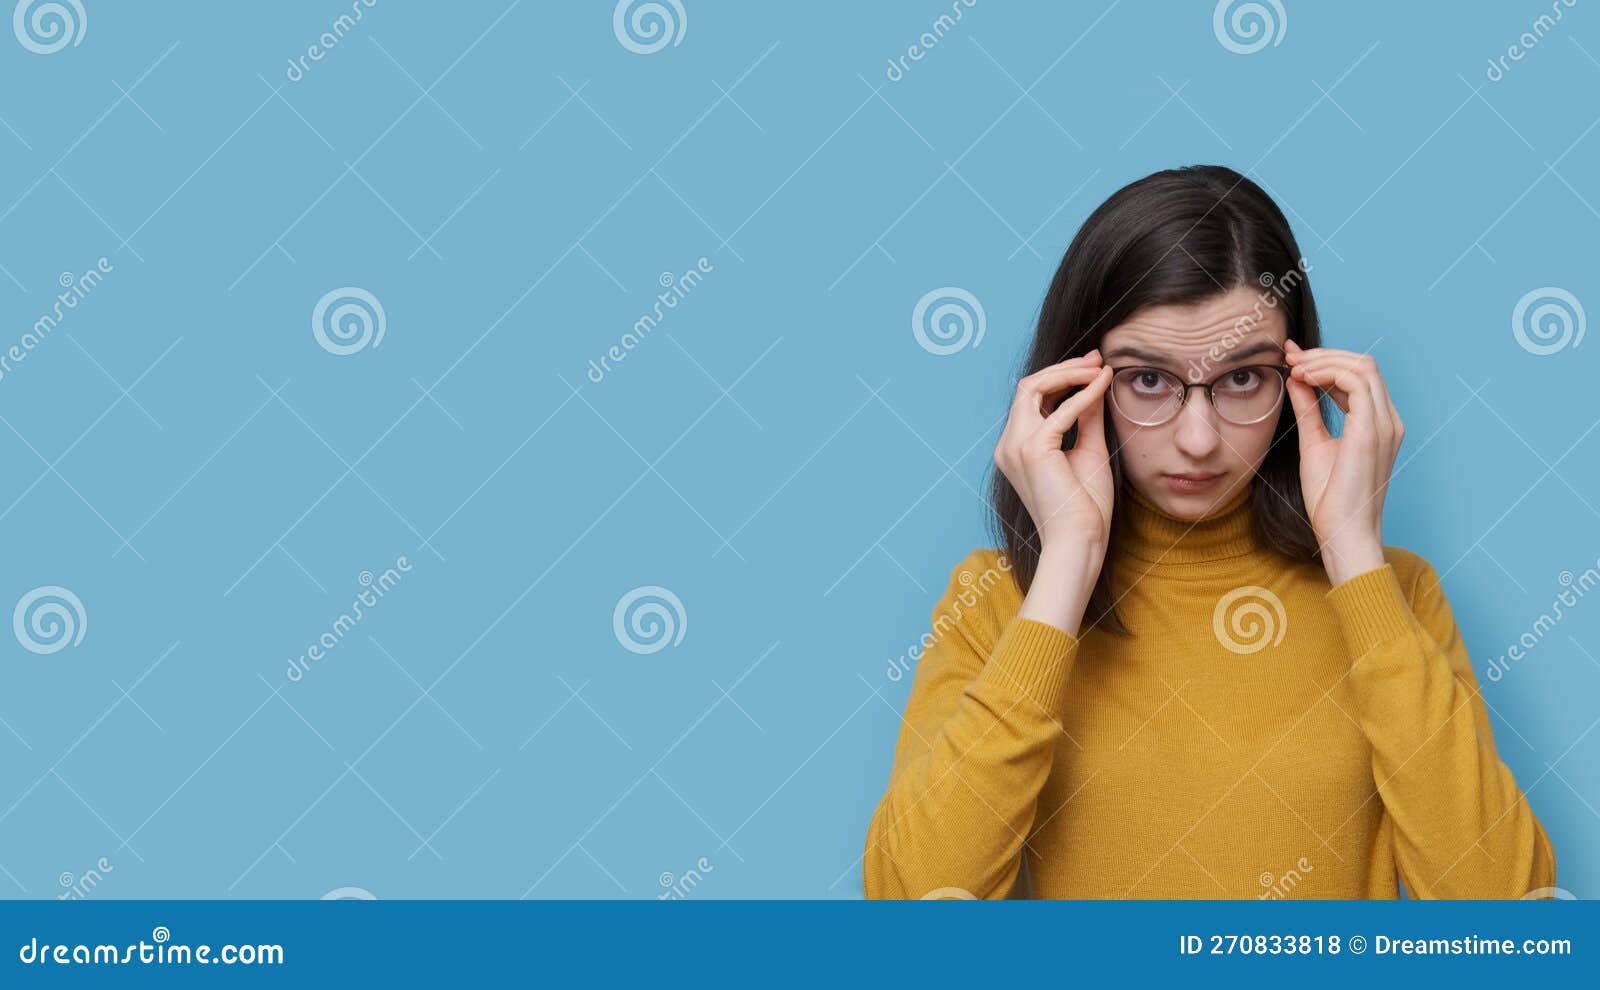 a smiling teenage student girl taking off or putting on glasses. girl sees better as trying new prescribed glasses.